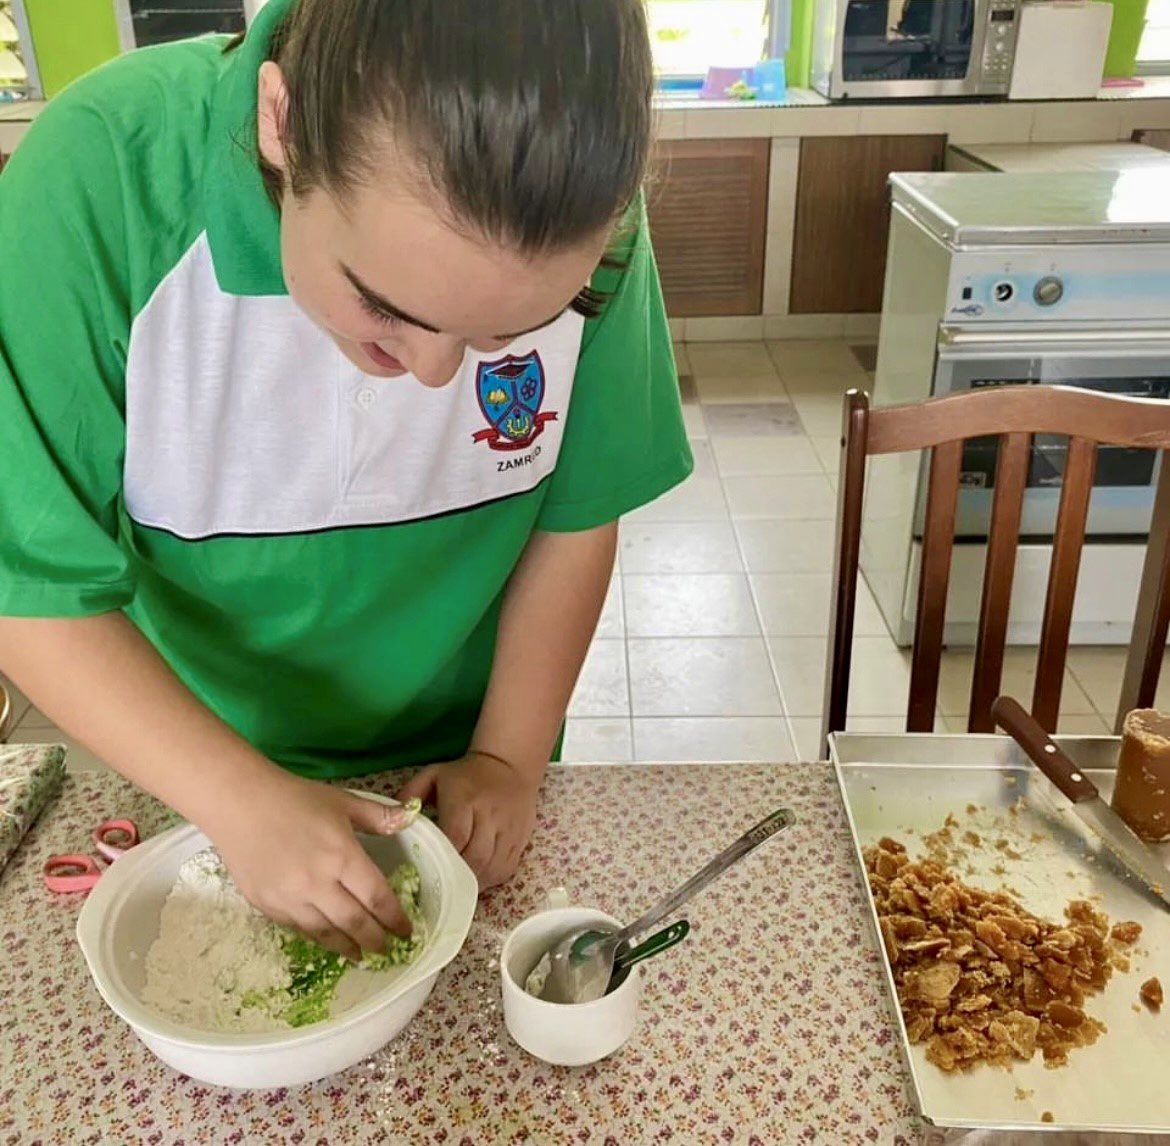 Kelty in Malaysia has taken to heart the motto of exchange students around the world: food is a key to culture! She and her Bahasa Melayu (Malay language) teacher enjoy cooking together, here making onde-onde. Enjoy, Kelty! #yesabroad #exchangeourworld @AFSMalaysia @usembassykl